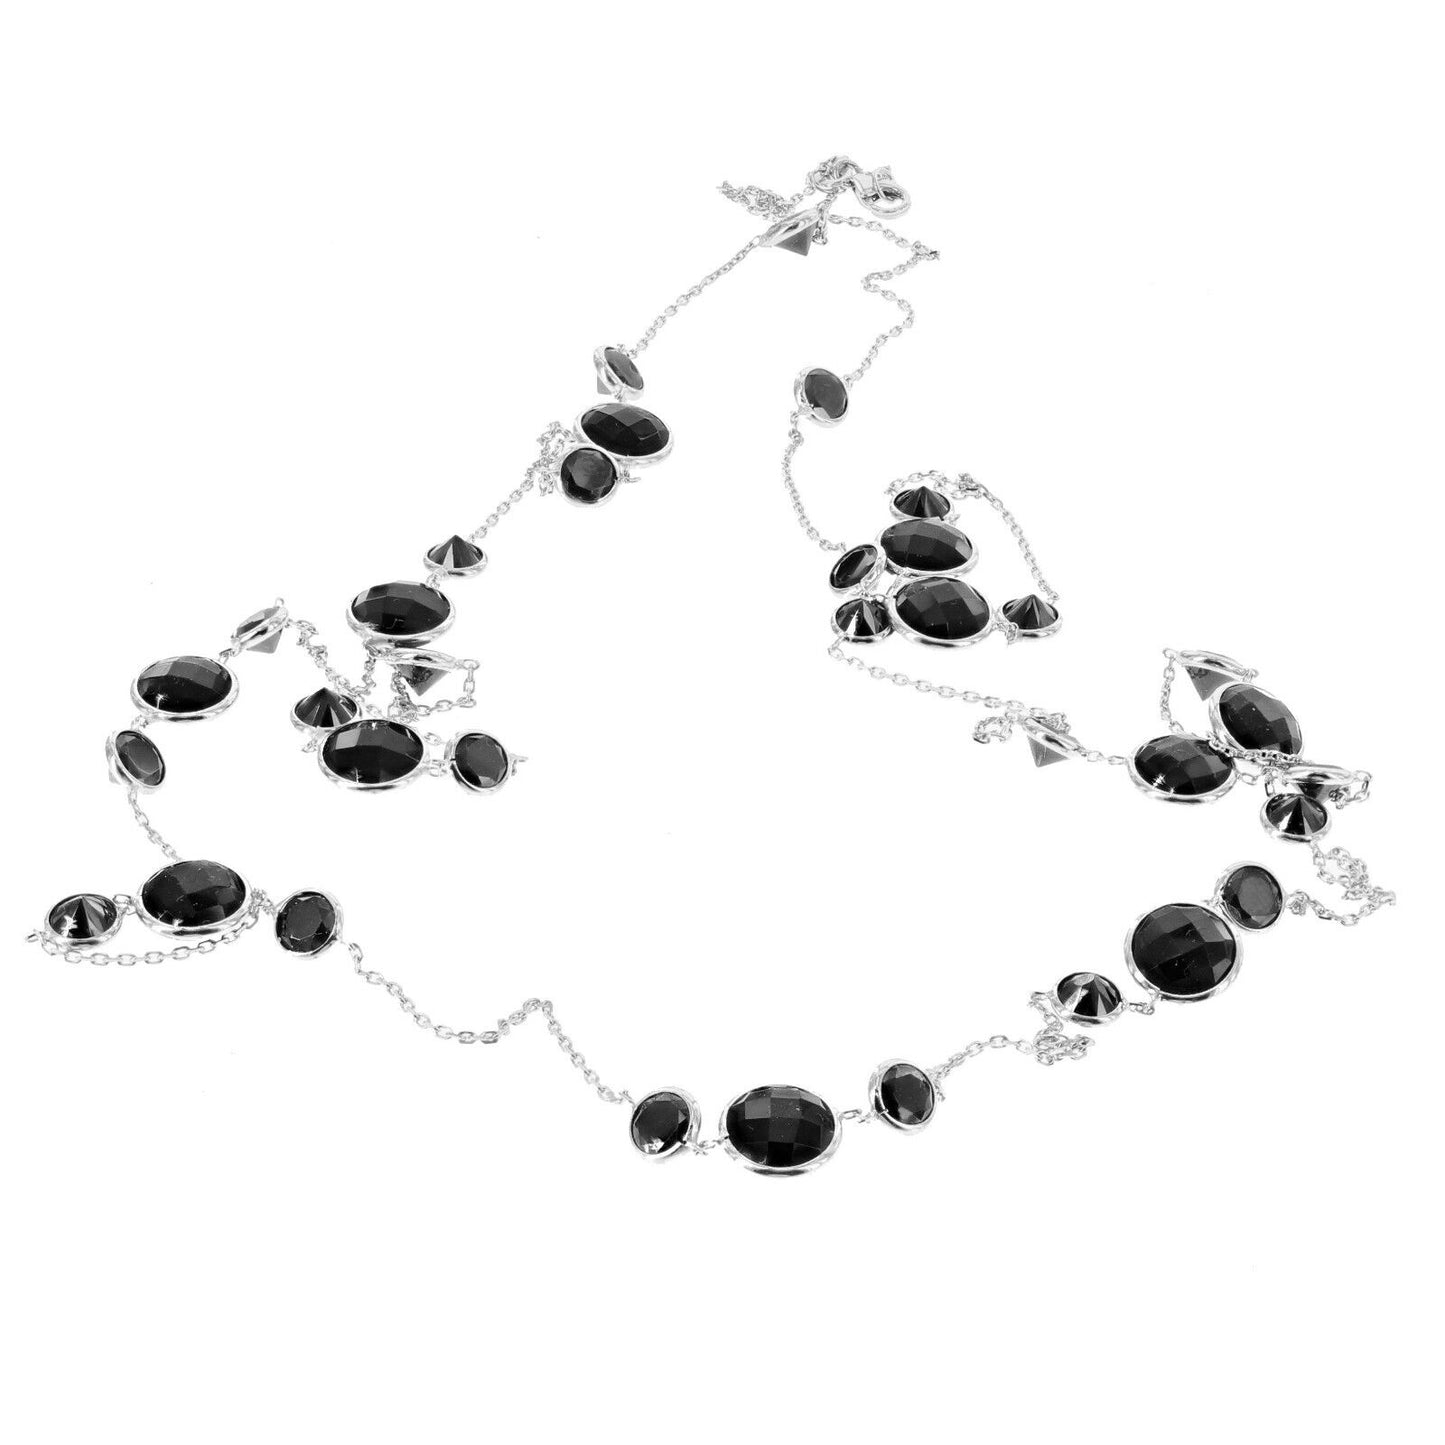 14K White Gold Station Necklace With 8 and 4 MM Round Onyx Gemstones 36 Inches